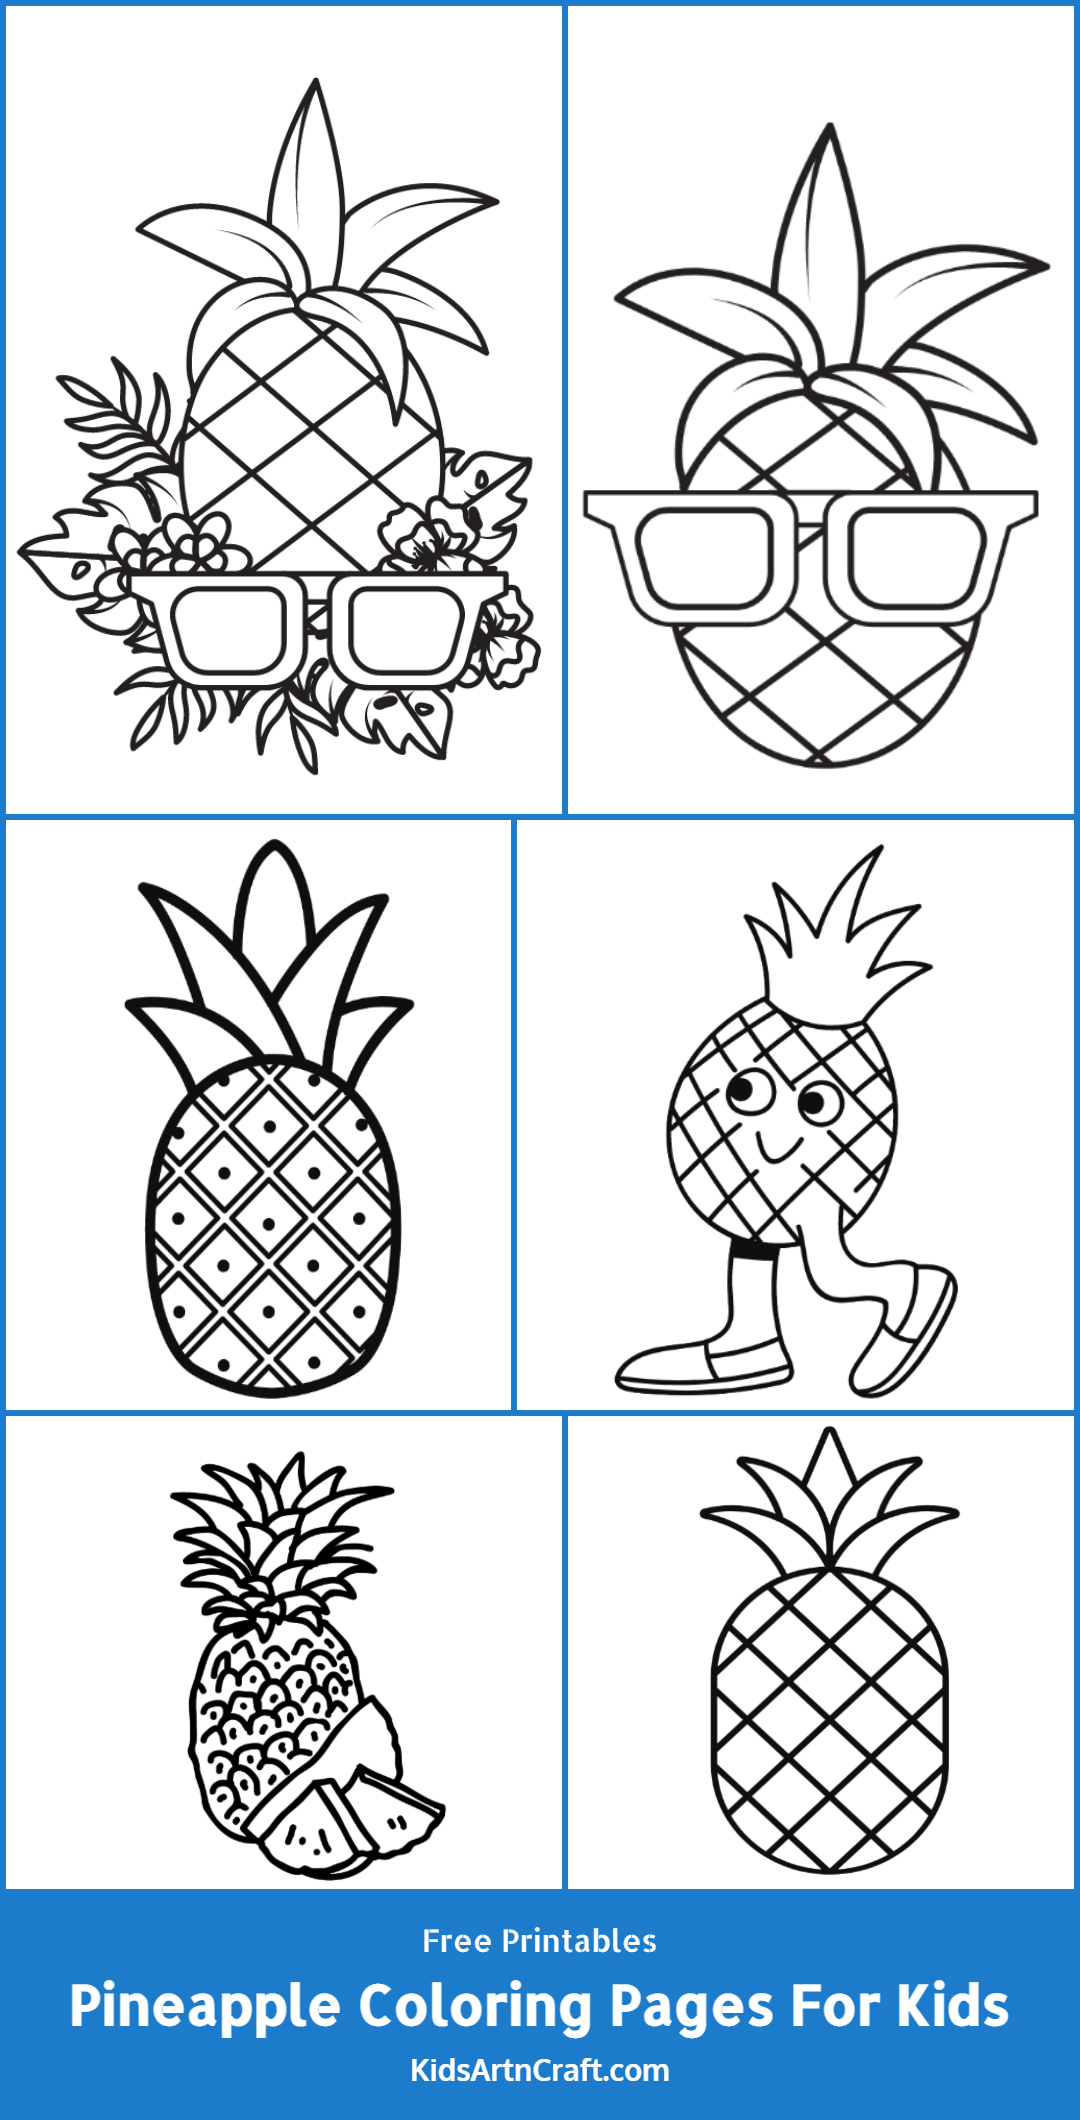 Pineapple Coloring Pages For Kids – Free Printables